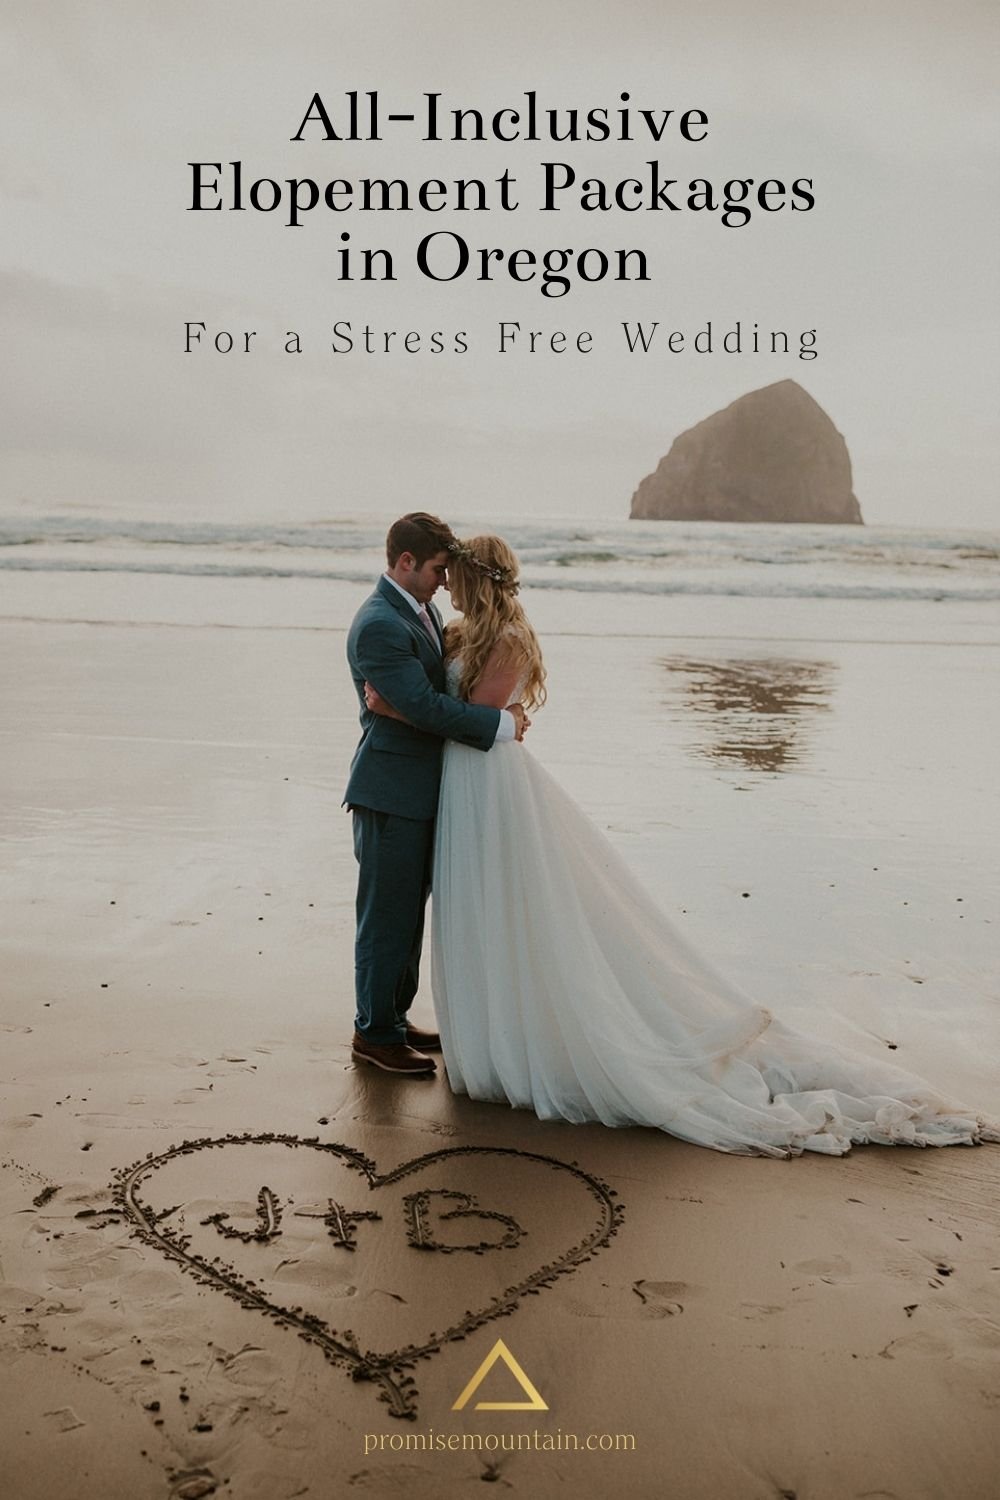 Bride and groom pose next to the heart they drew on the sand; image overlaid with text that reads All-Inclusive Elopement Packages in Oregon for a Stress Free Wedding